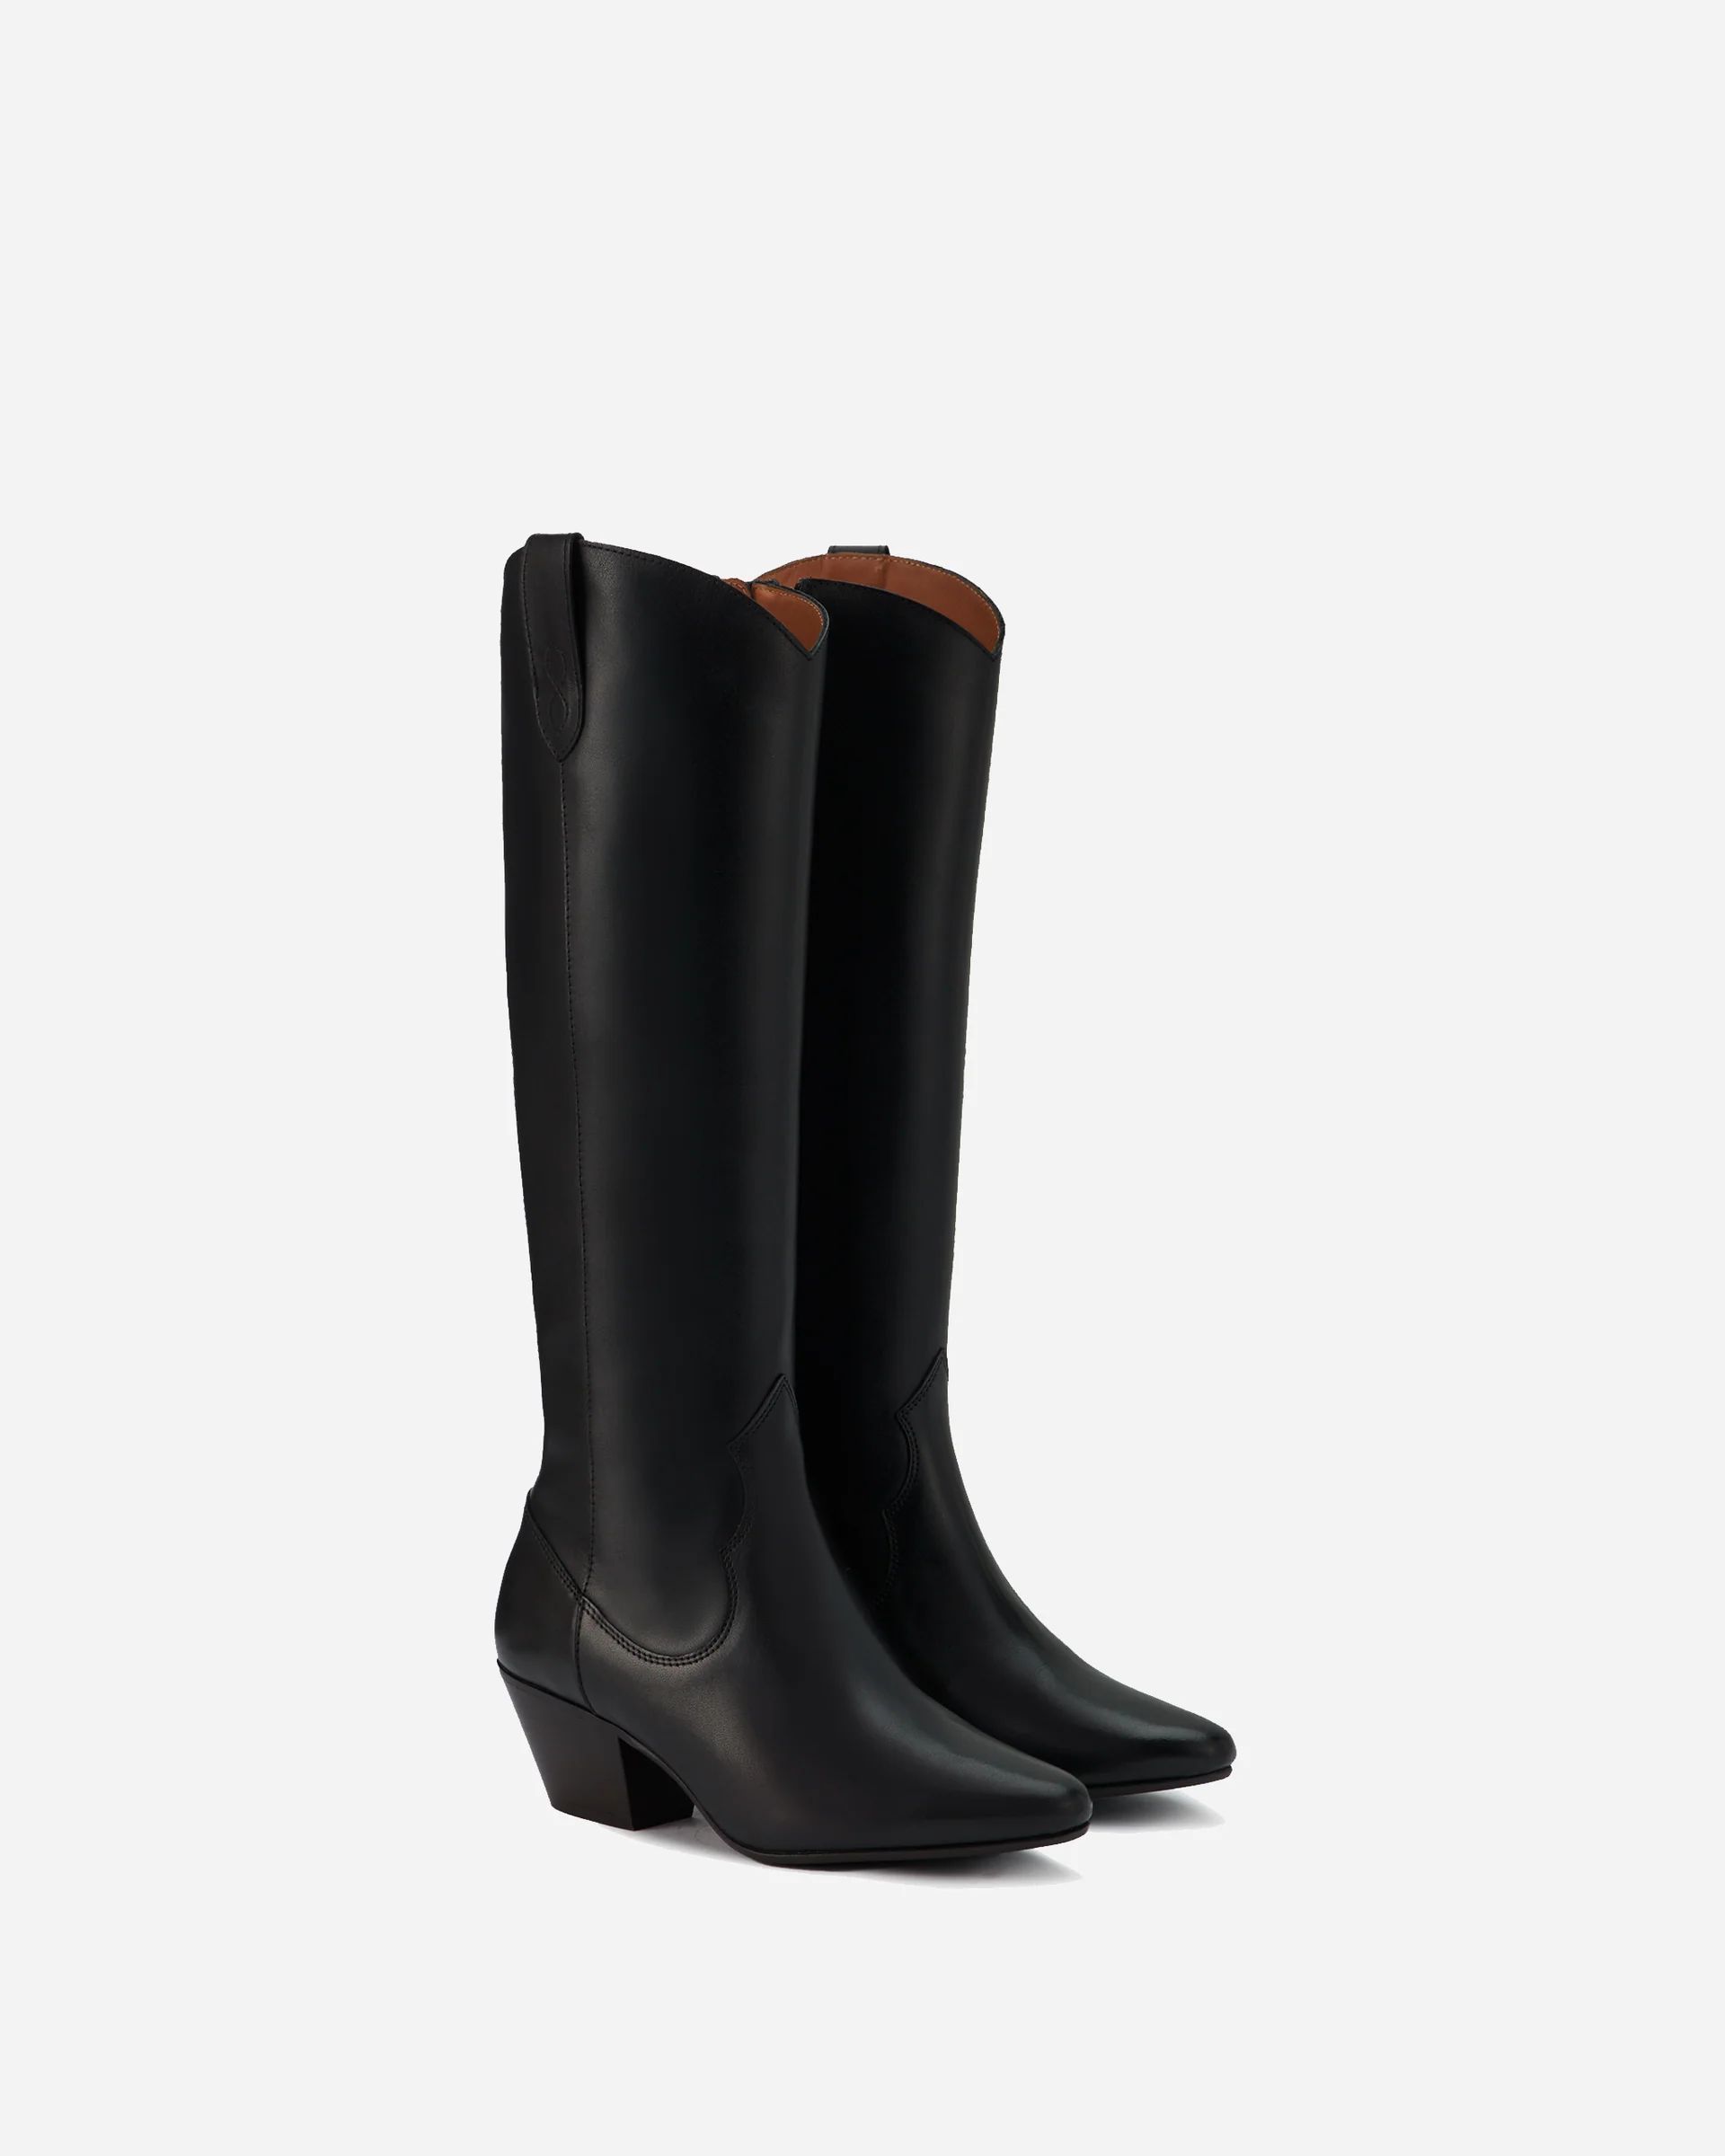 Saffron Knee High Boots in Black Leather | DuoBoots